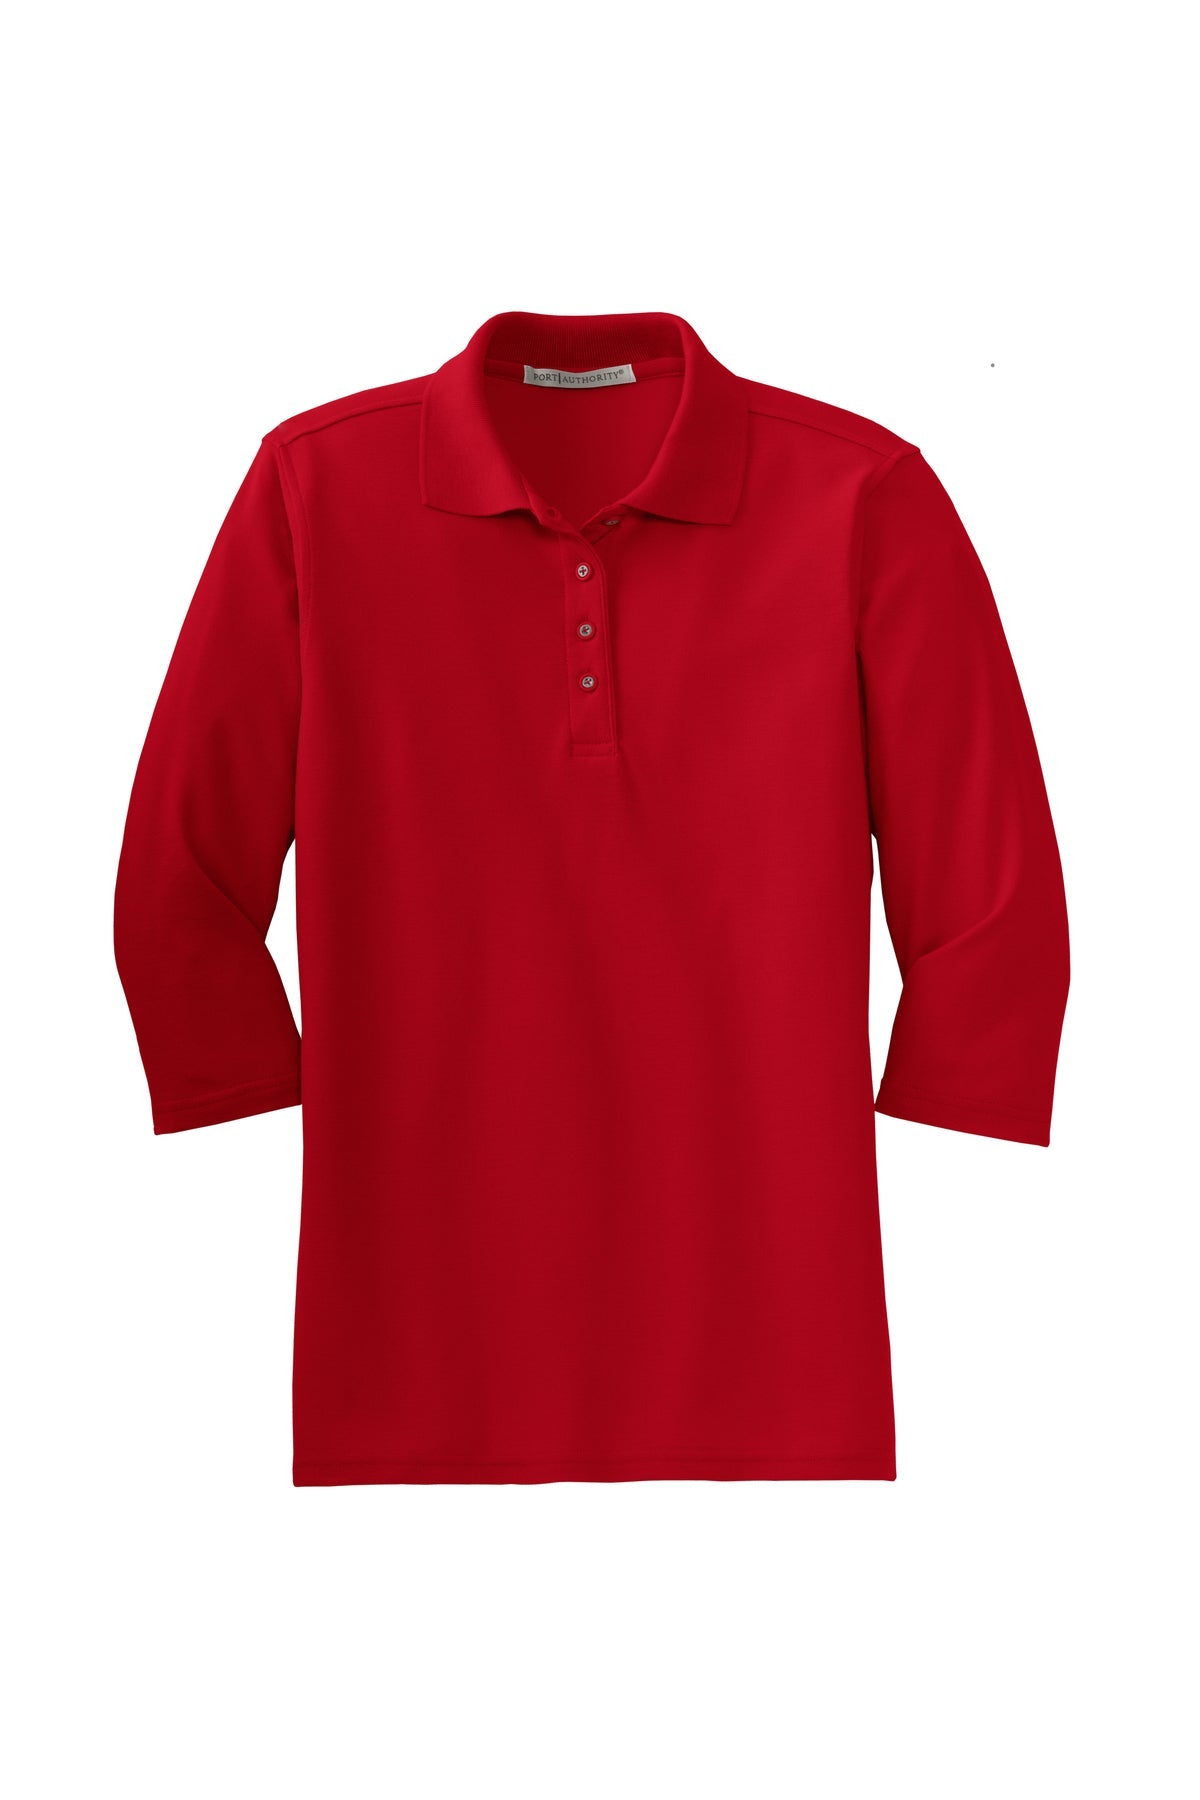 L562 Port Authority® Ladies Silk Touch™ 3/4-Sleeve Polo